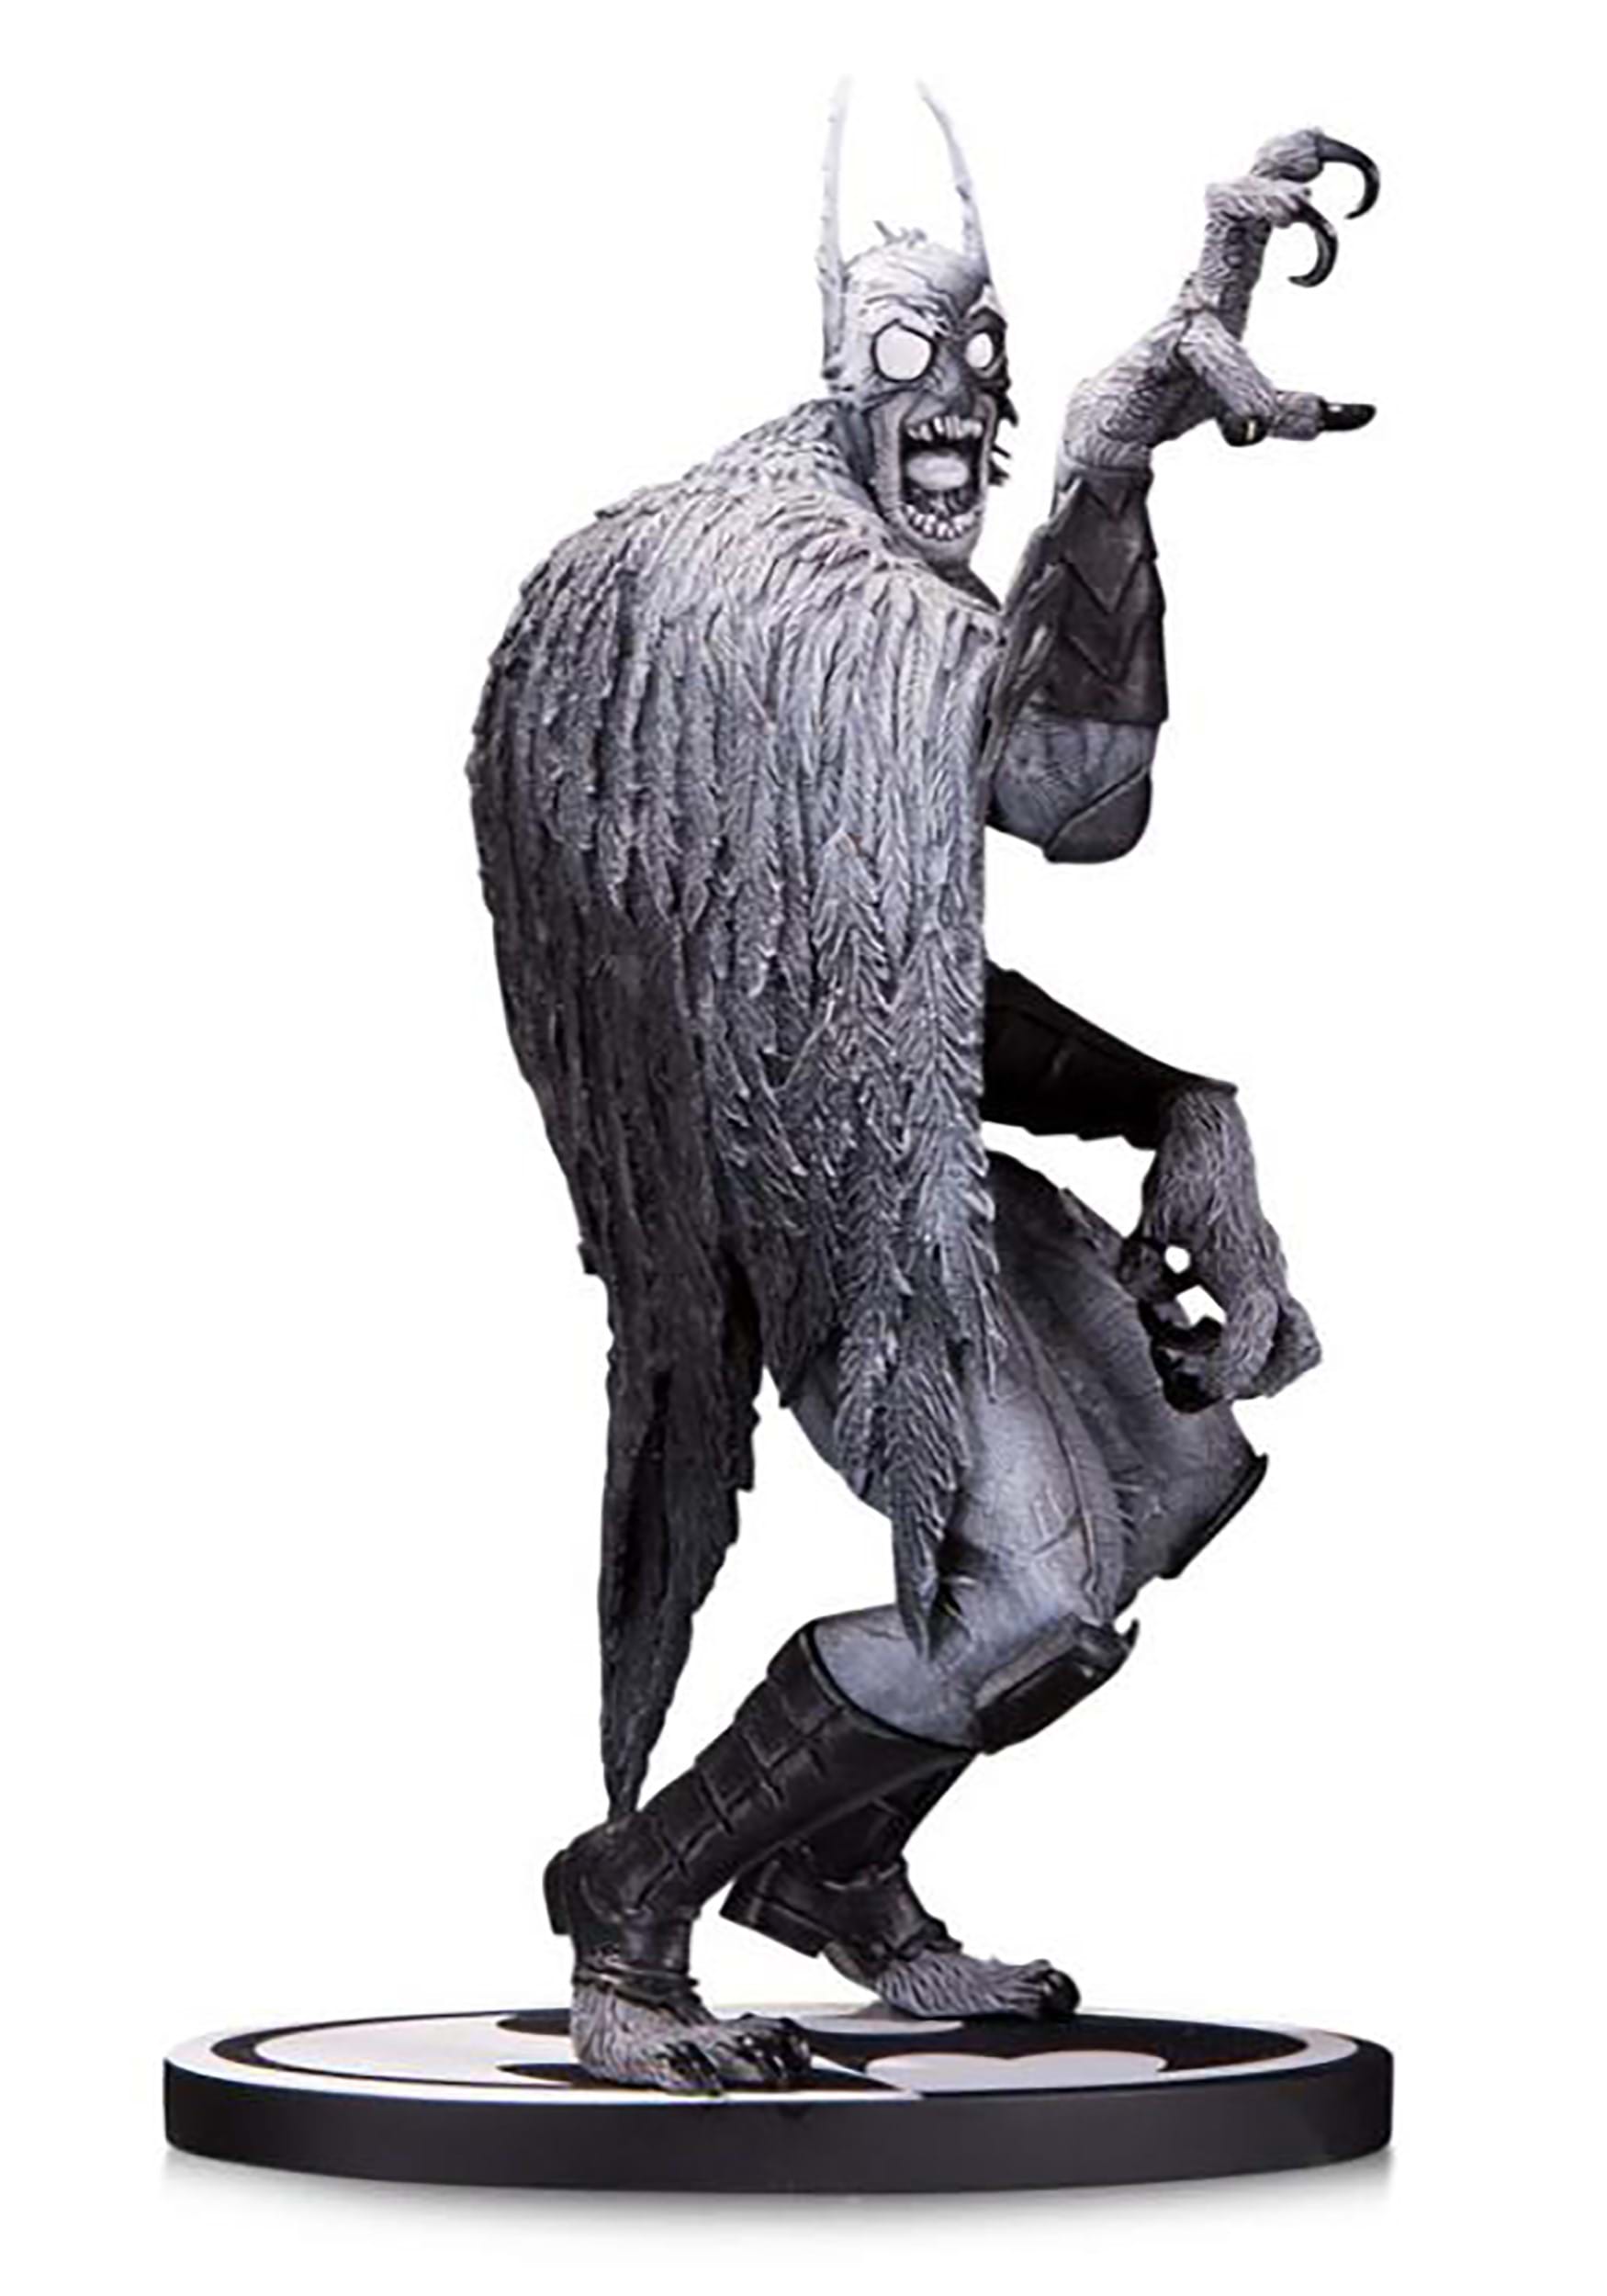 Batman Black and White Limited Edition Batmonster Statue